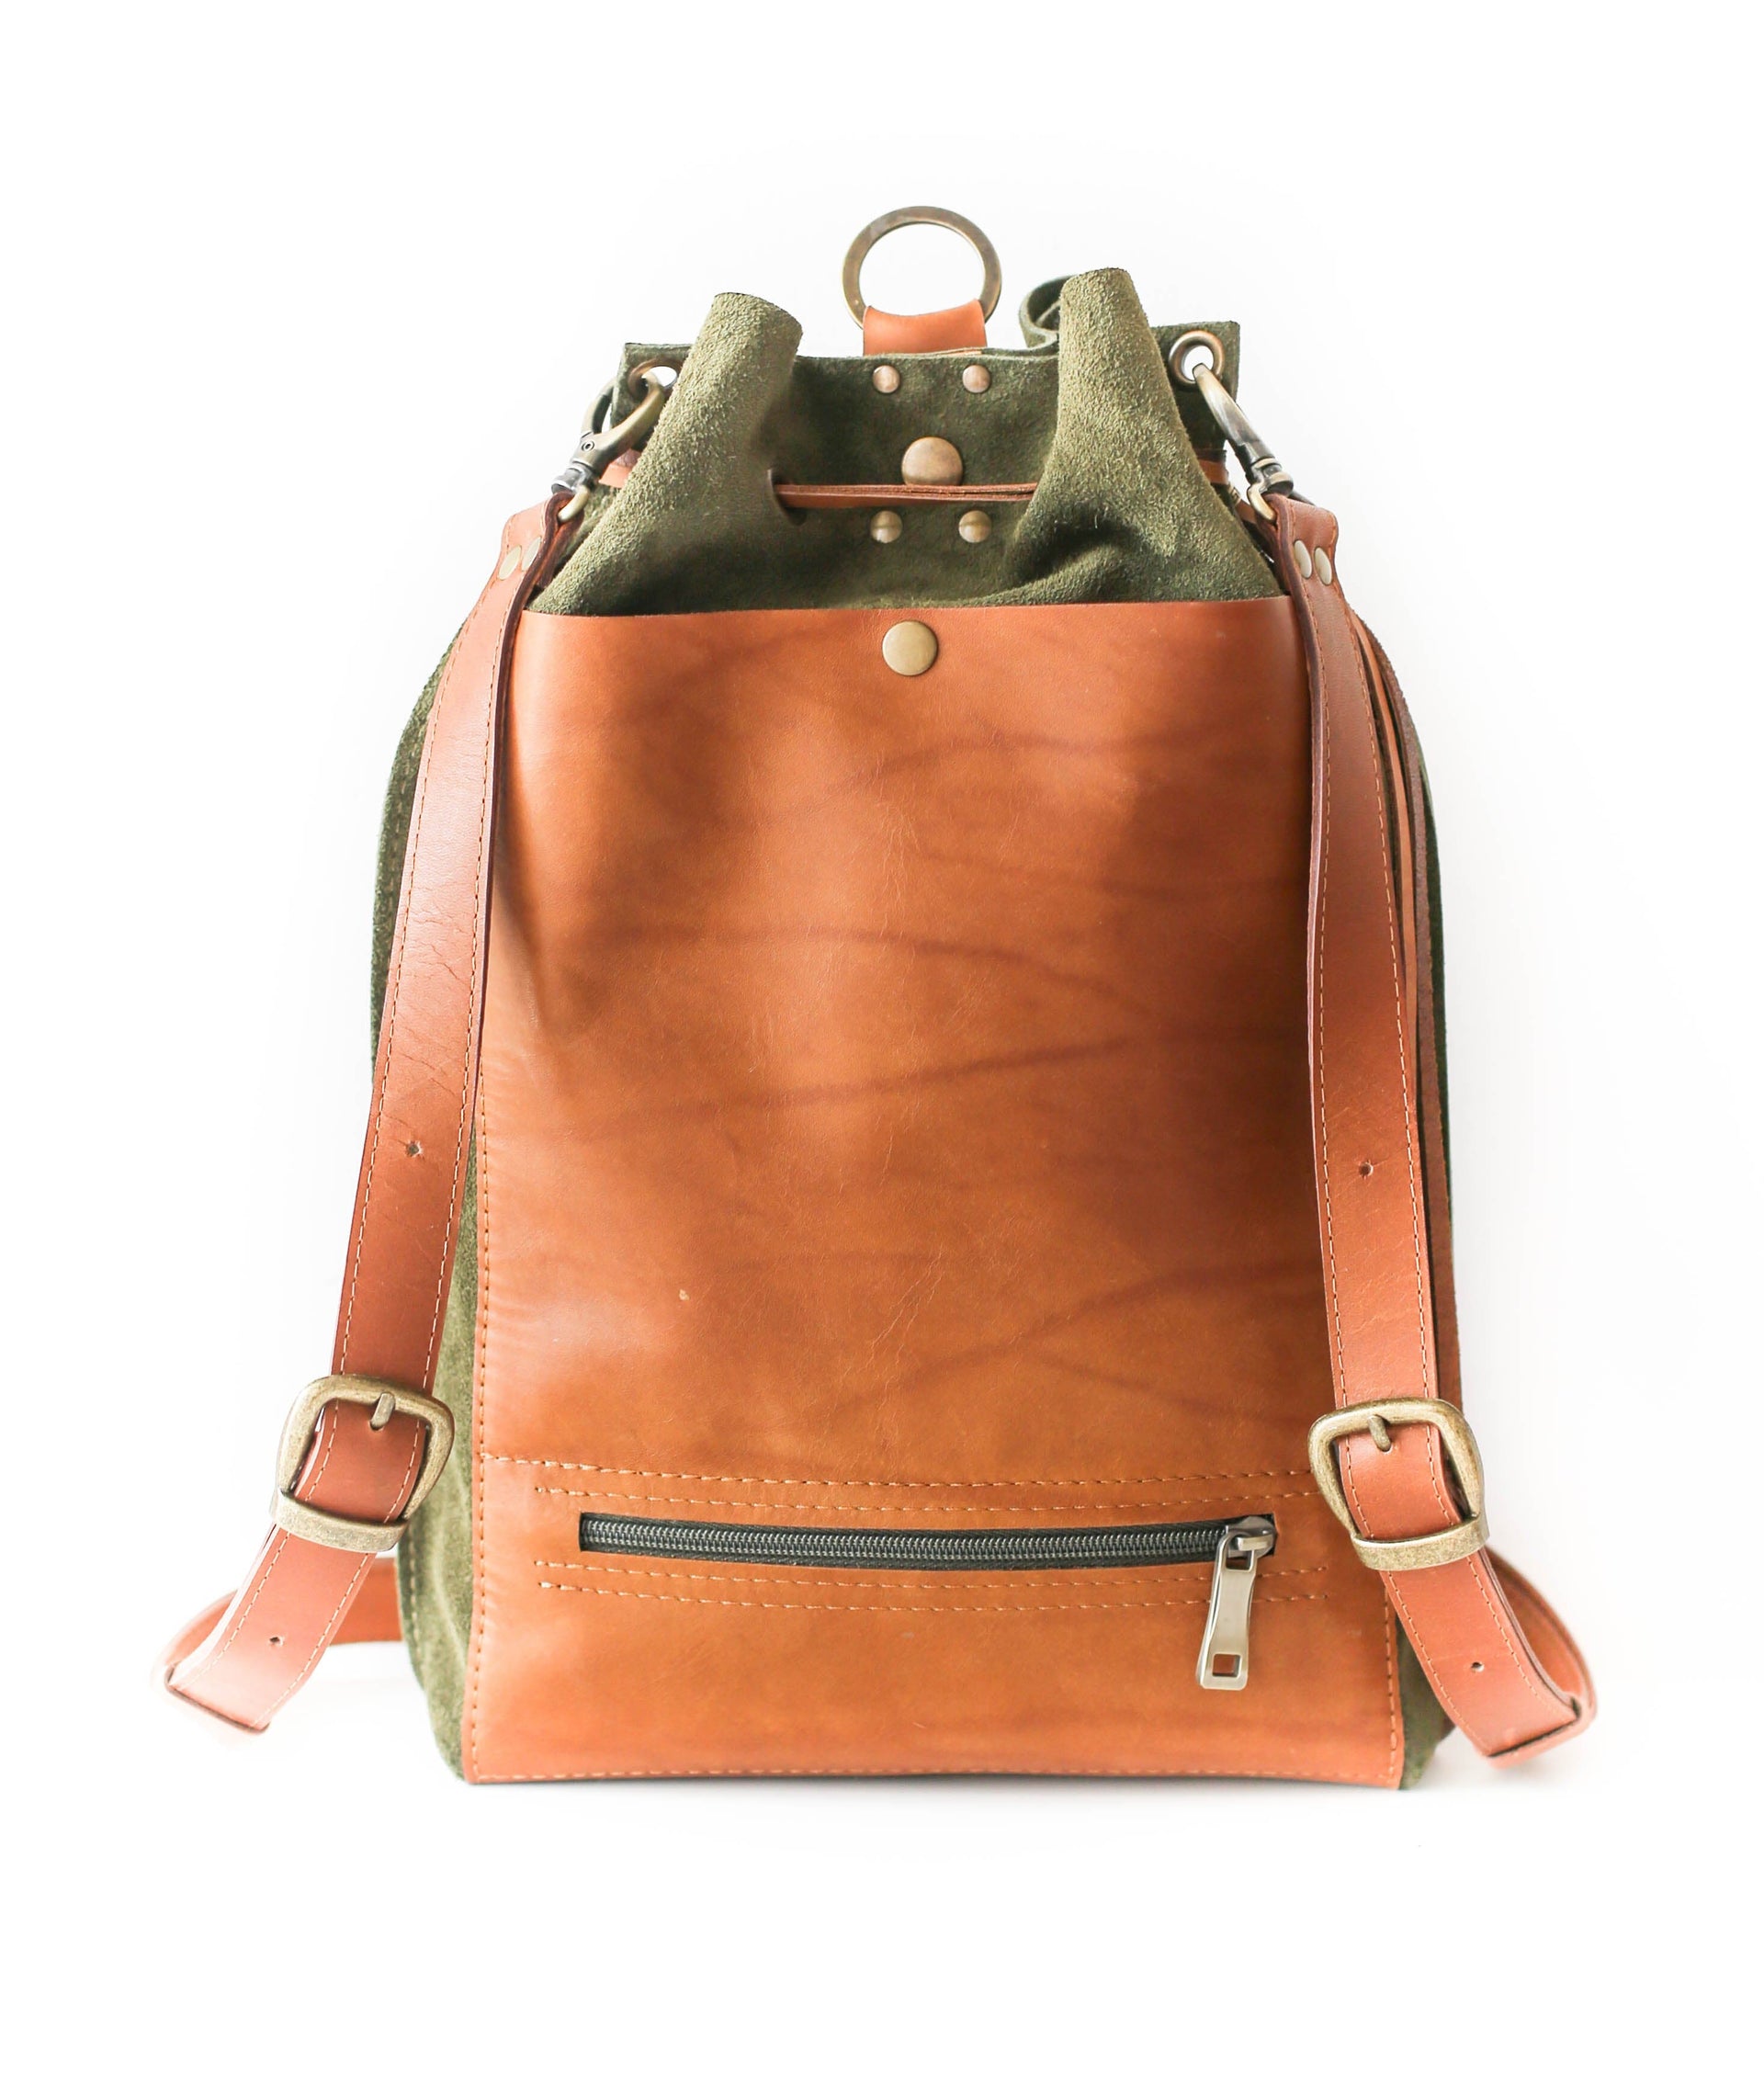 Convertible Suede leather backpack